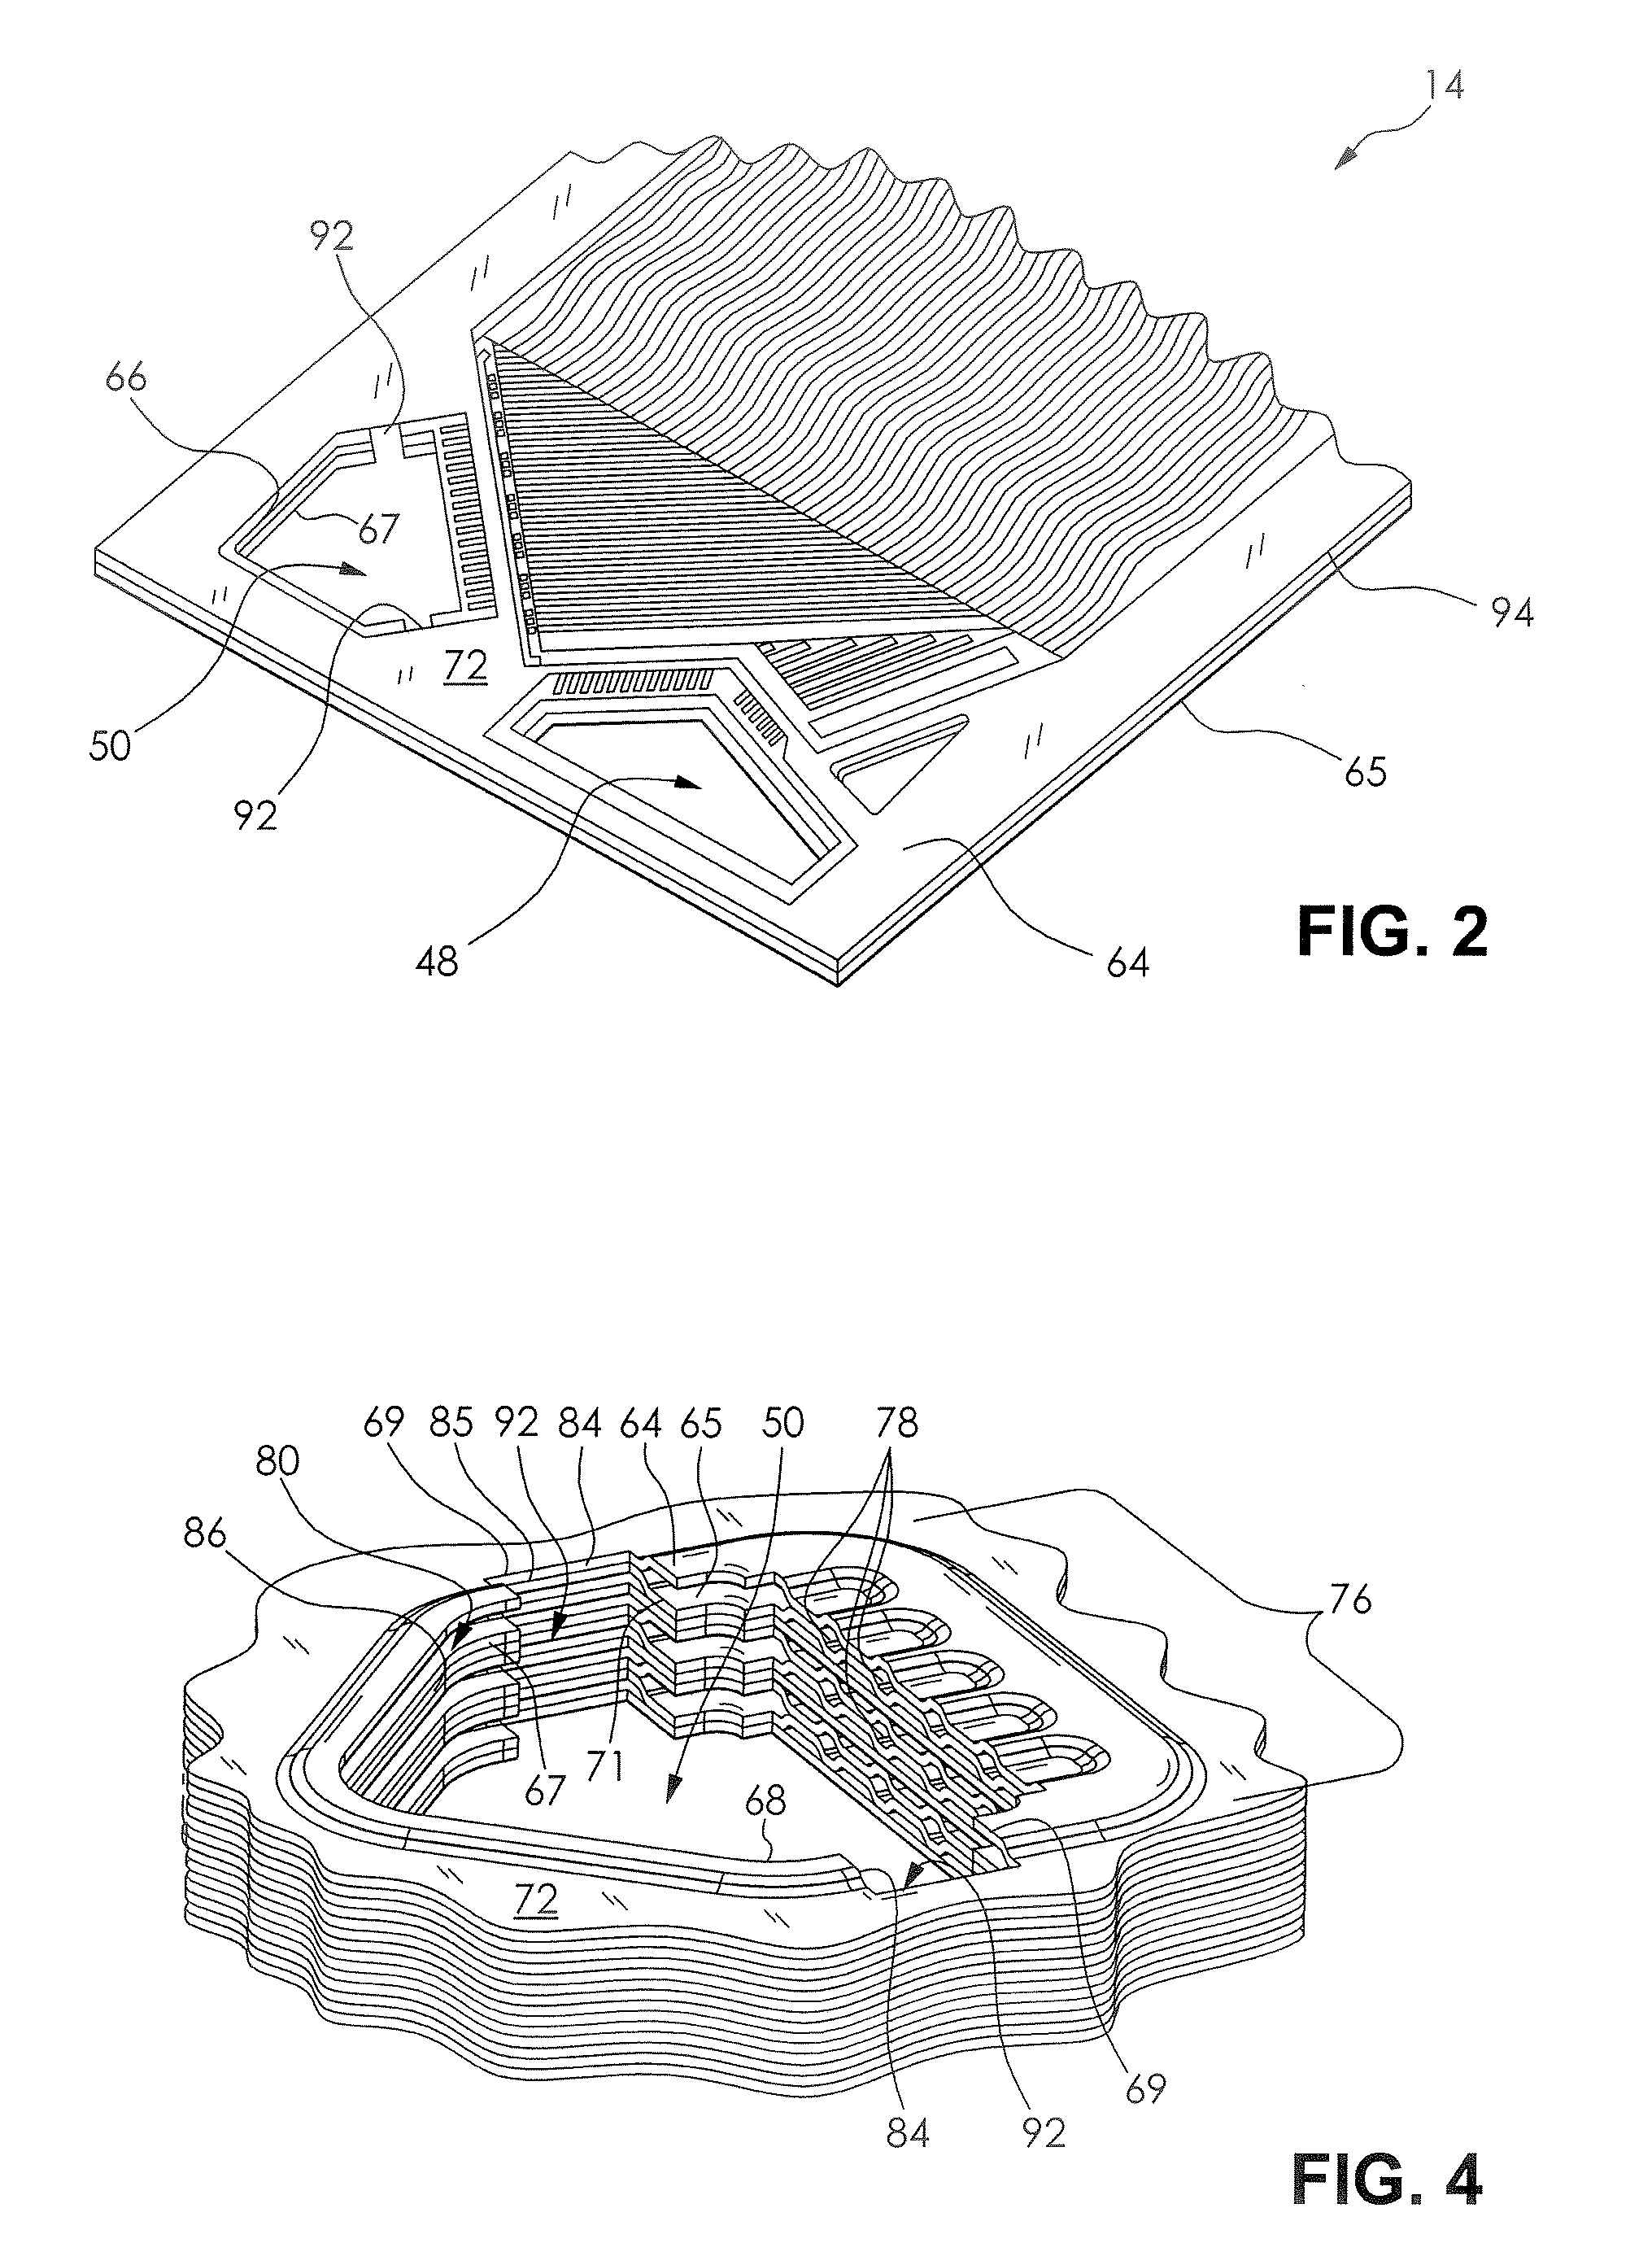 Bipolar plate header formed features